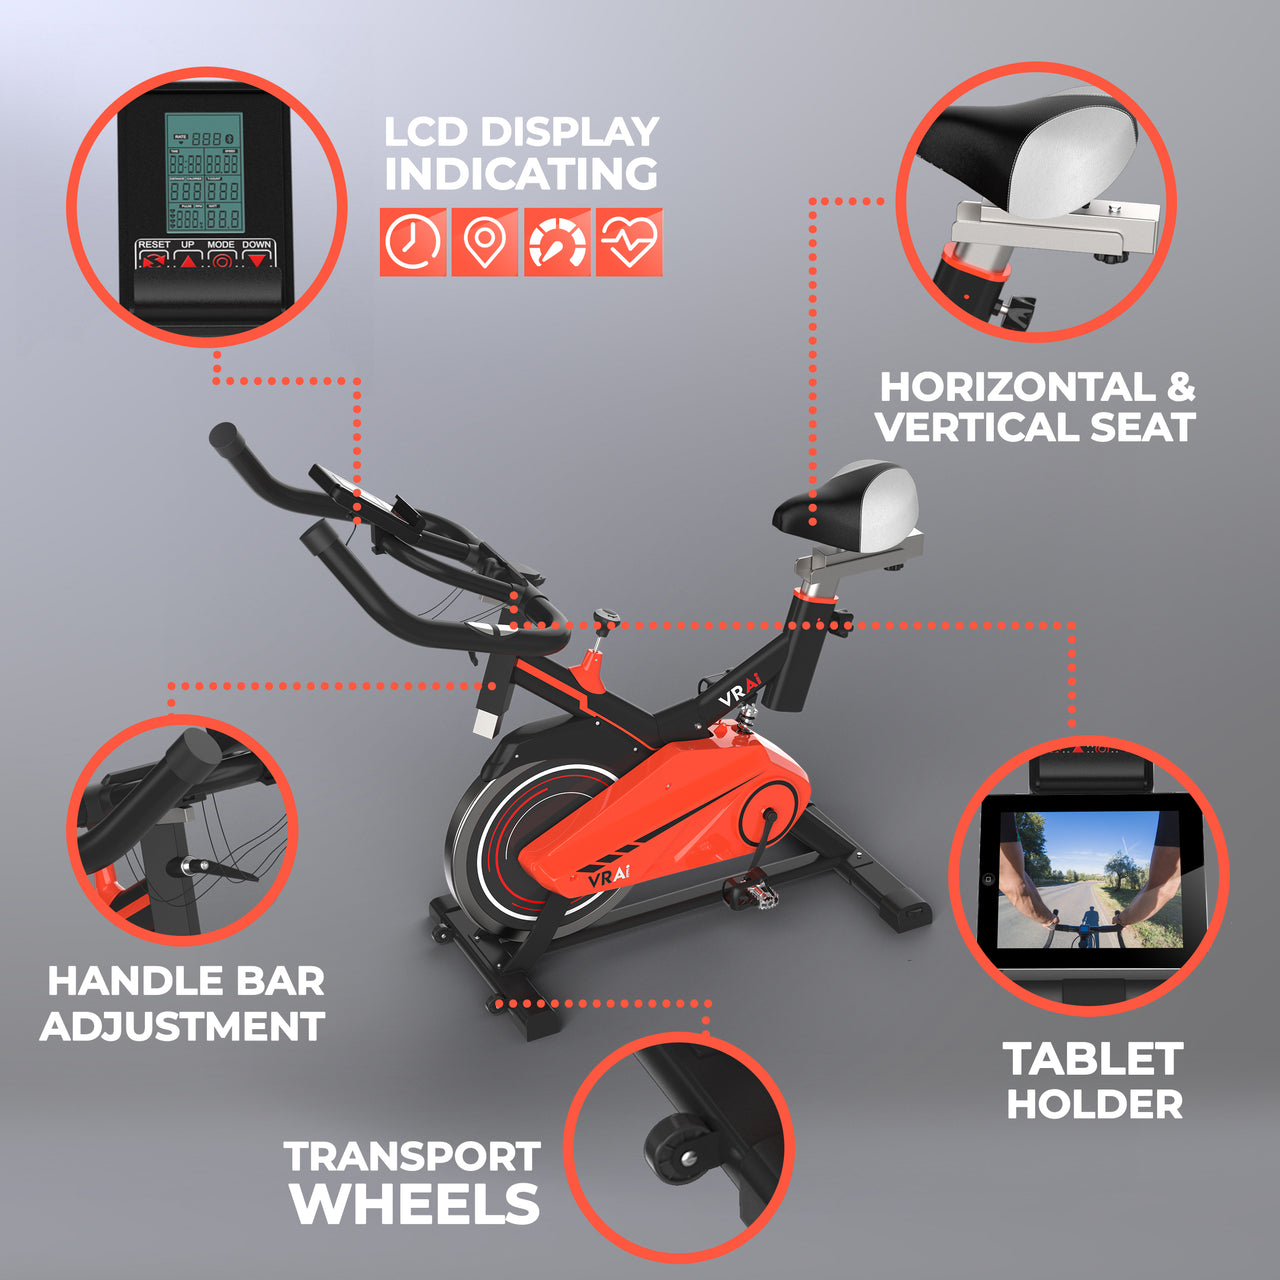 VRAi FITNESS SB1000X EXERCISE SPIN BIKE WITH BLUETOOTH APP COMPATIBILITY [Ultimate Fitness Bundle]